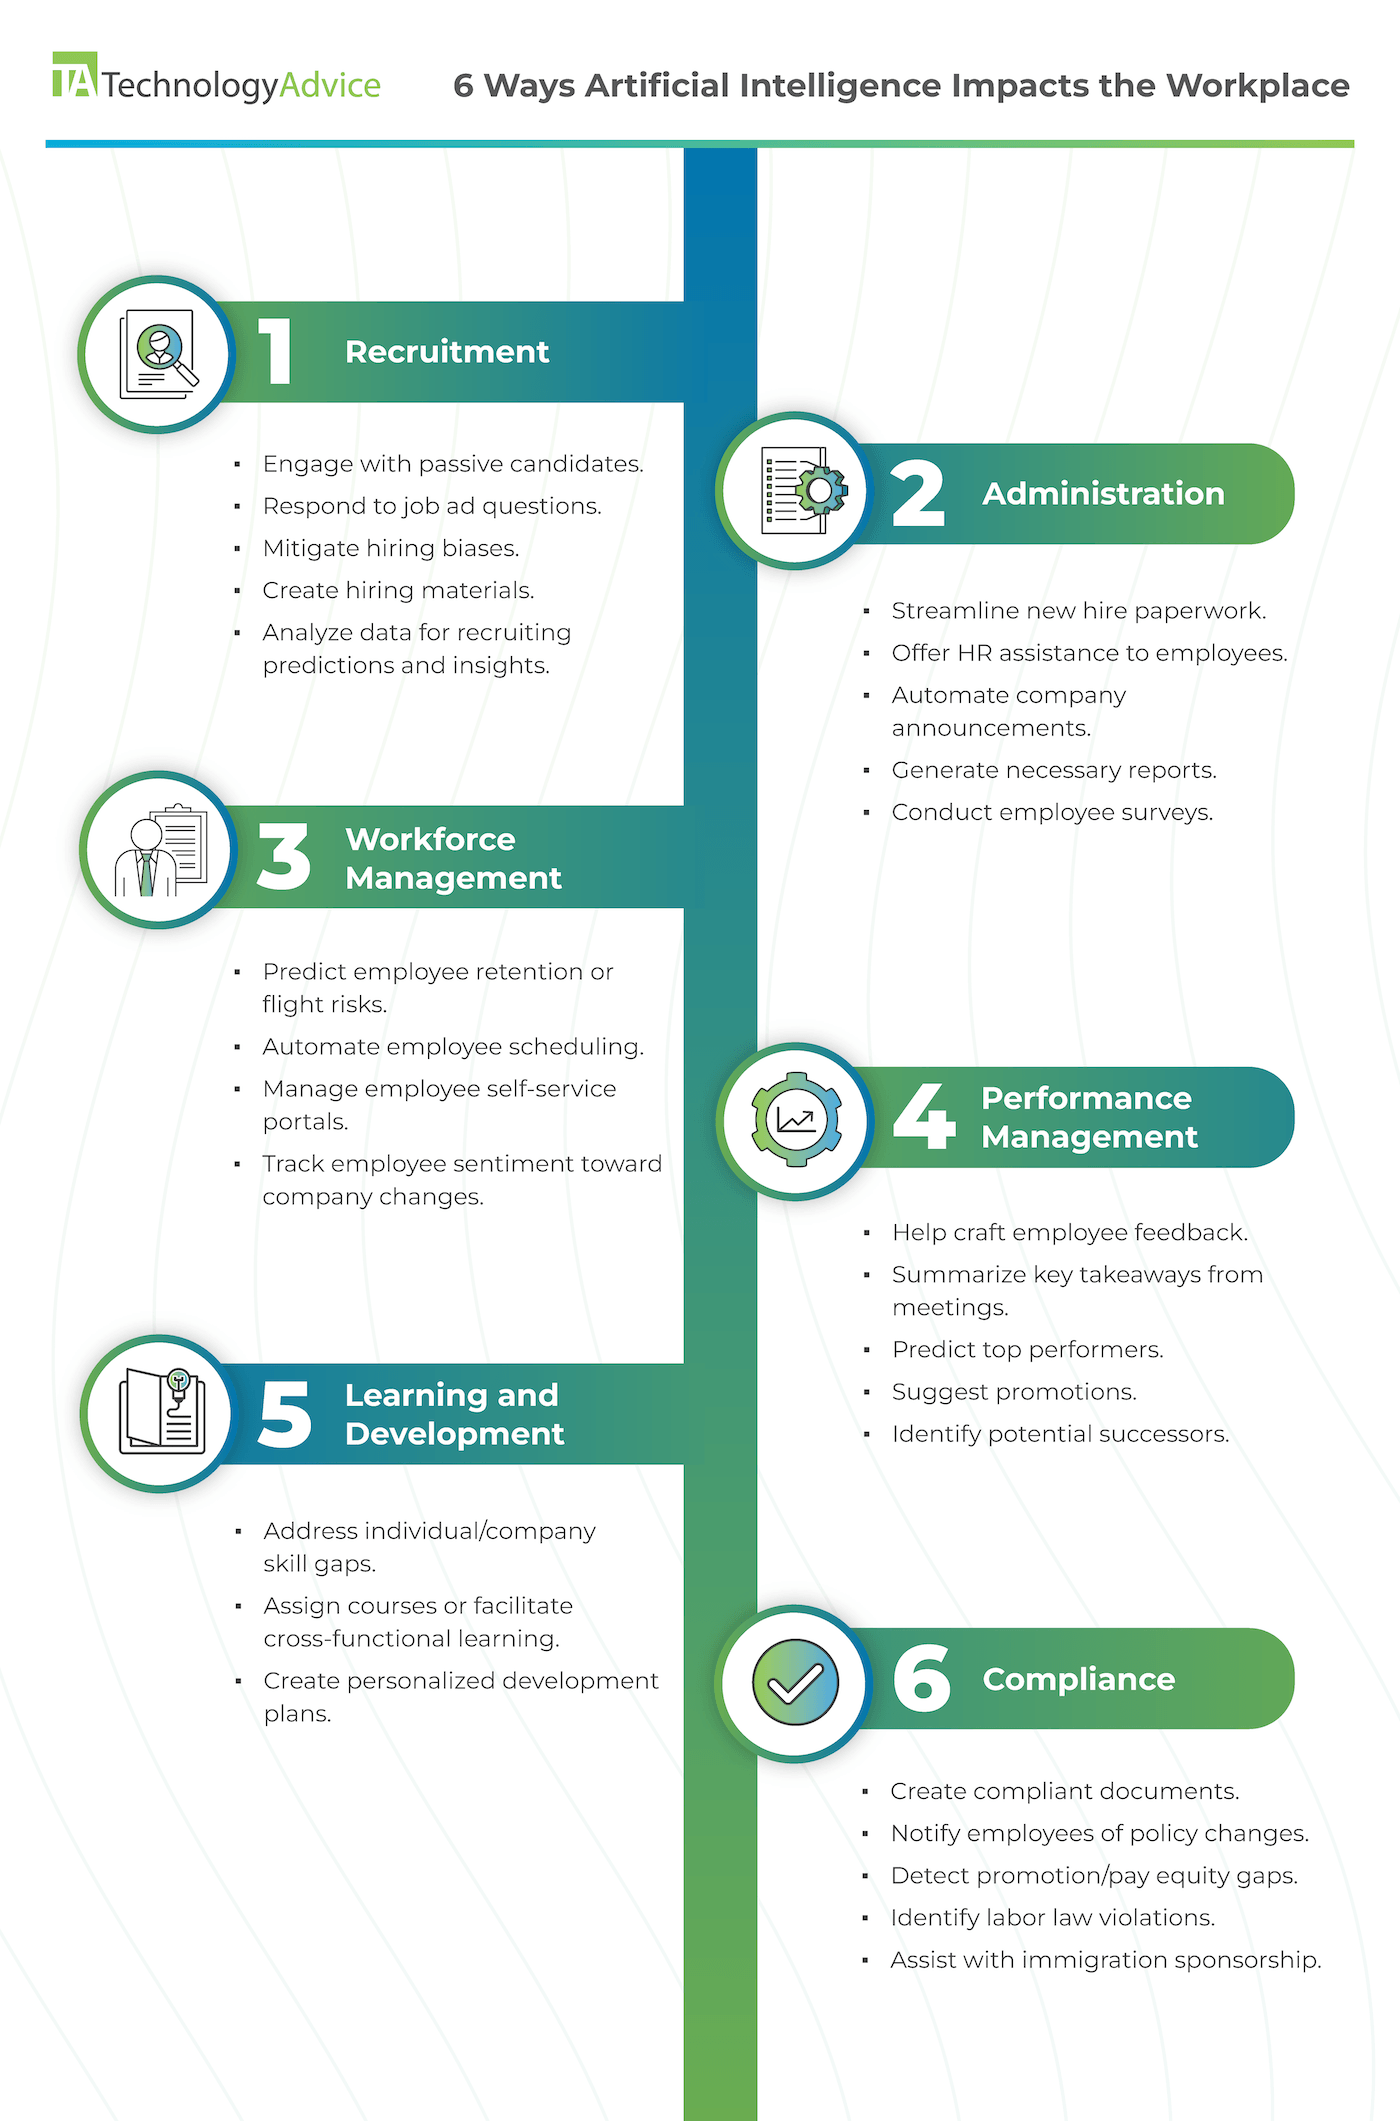 Infographic listing the ways that AI can impact the workplace in recruitment, administration, workforce management, performance management, learning and development, and compliance.